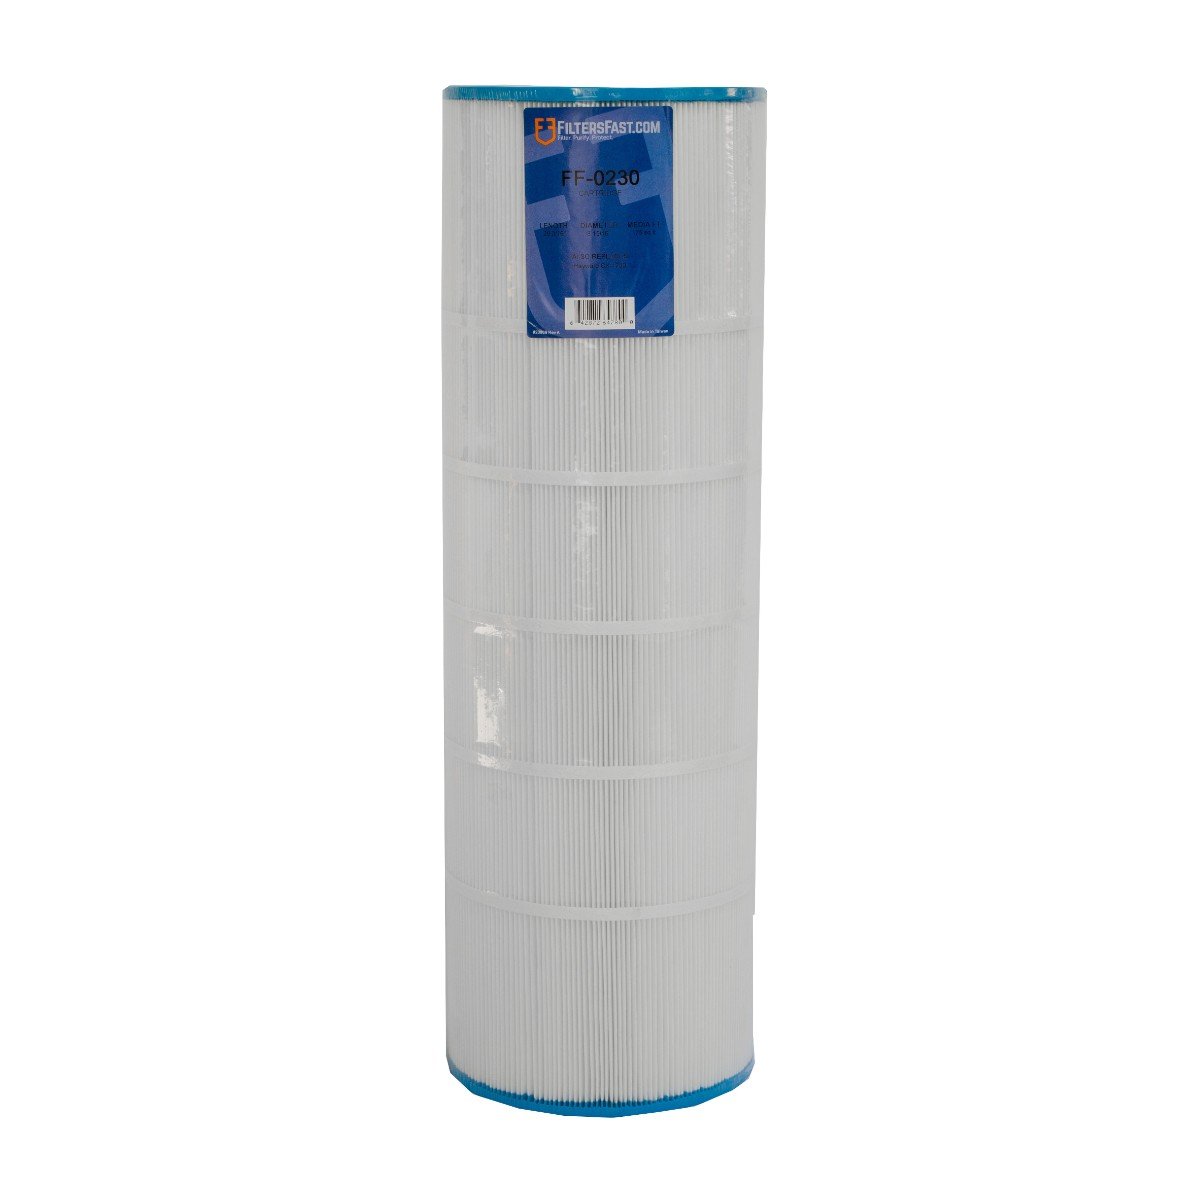 Filters Fast&reg; FF-0230 Replacement Pool & Spa Filter Cartridge